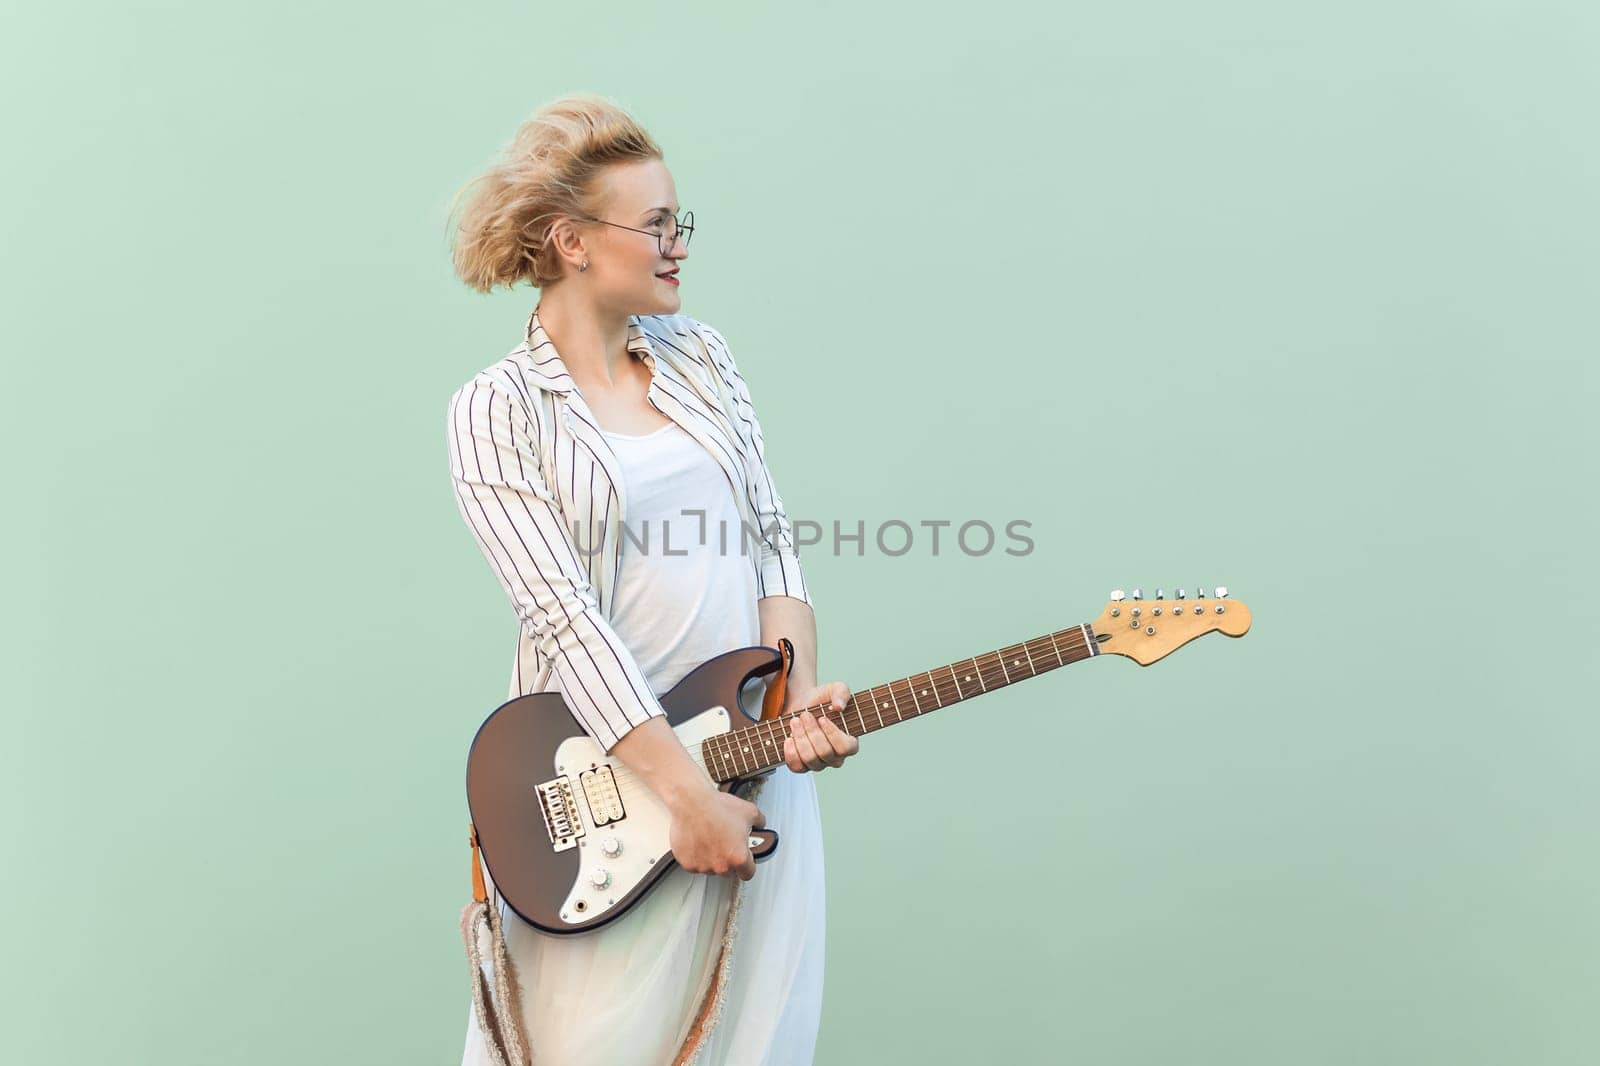 Portrait of beautiful positive blonde woman in white shirt, skirt, and striped blouse with eyeglasses, holding guitar and looking away. Indoor studio shot isolated on light green background.